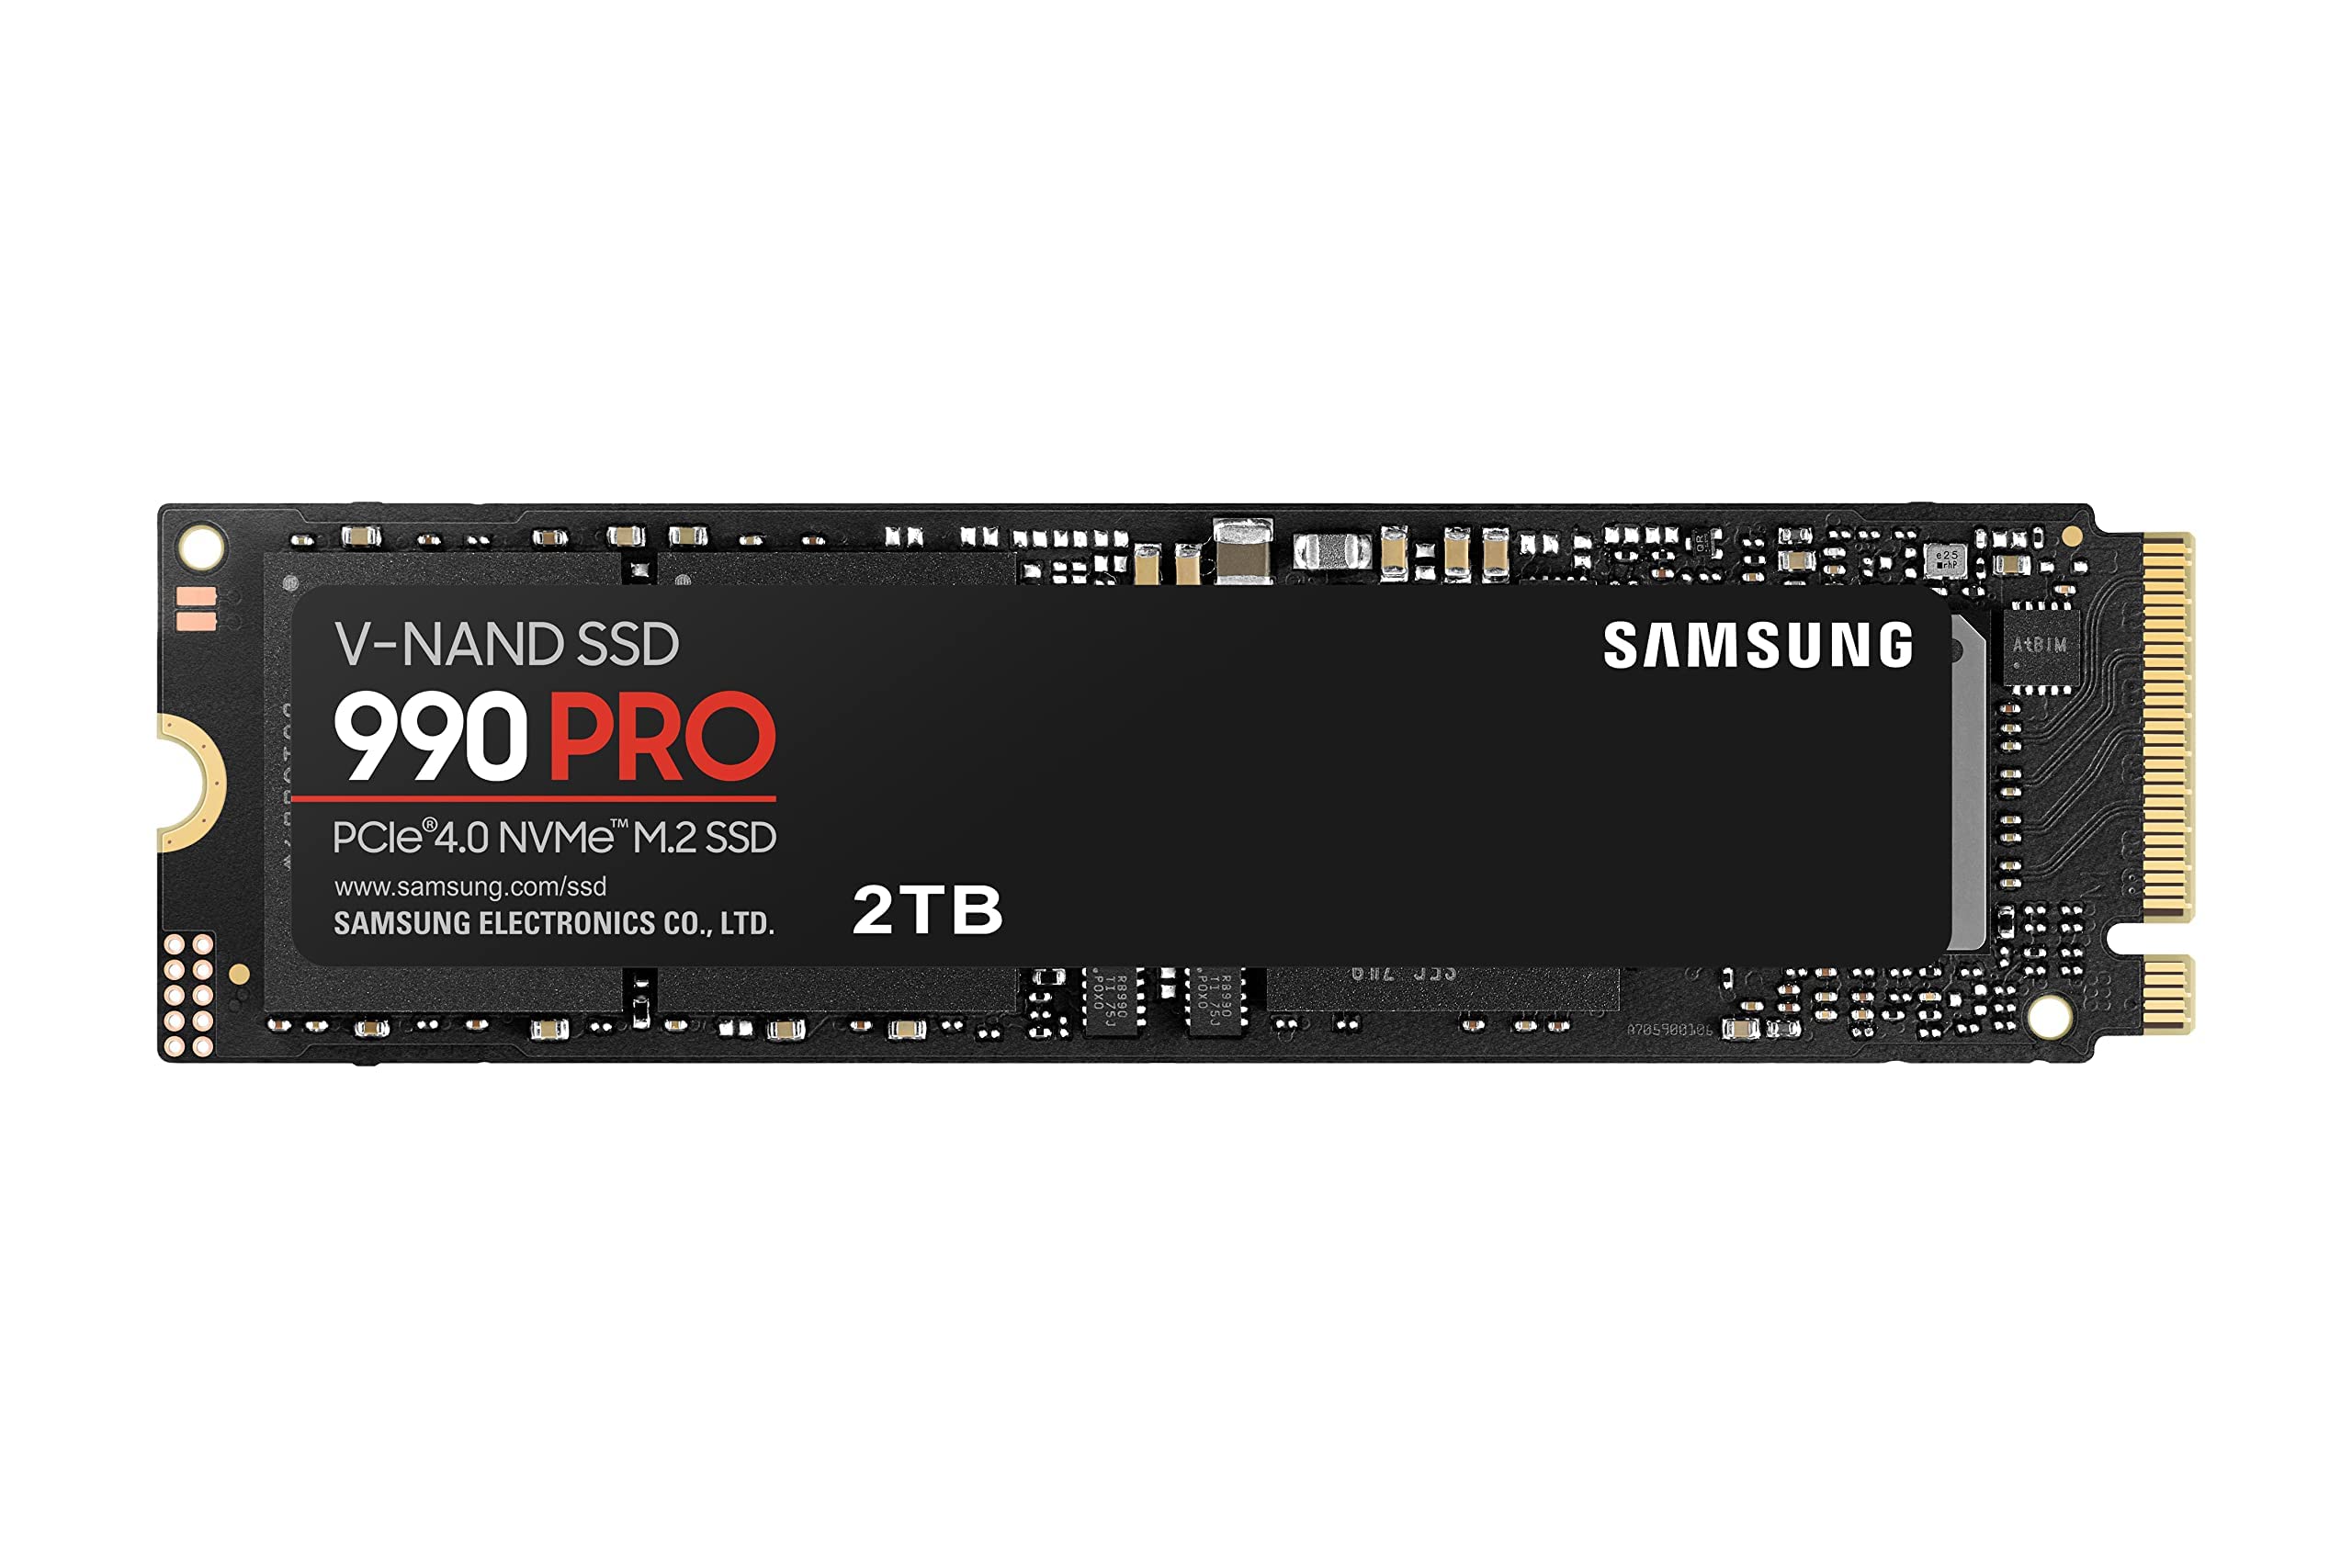 2TB Samsung 990 Pro PCIe 4.0 NVMe M.2 Solid State Drive SSD $120 + Free Shipping